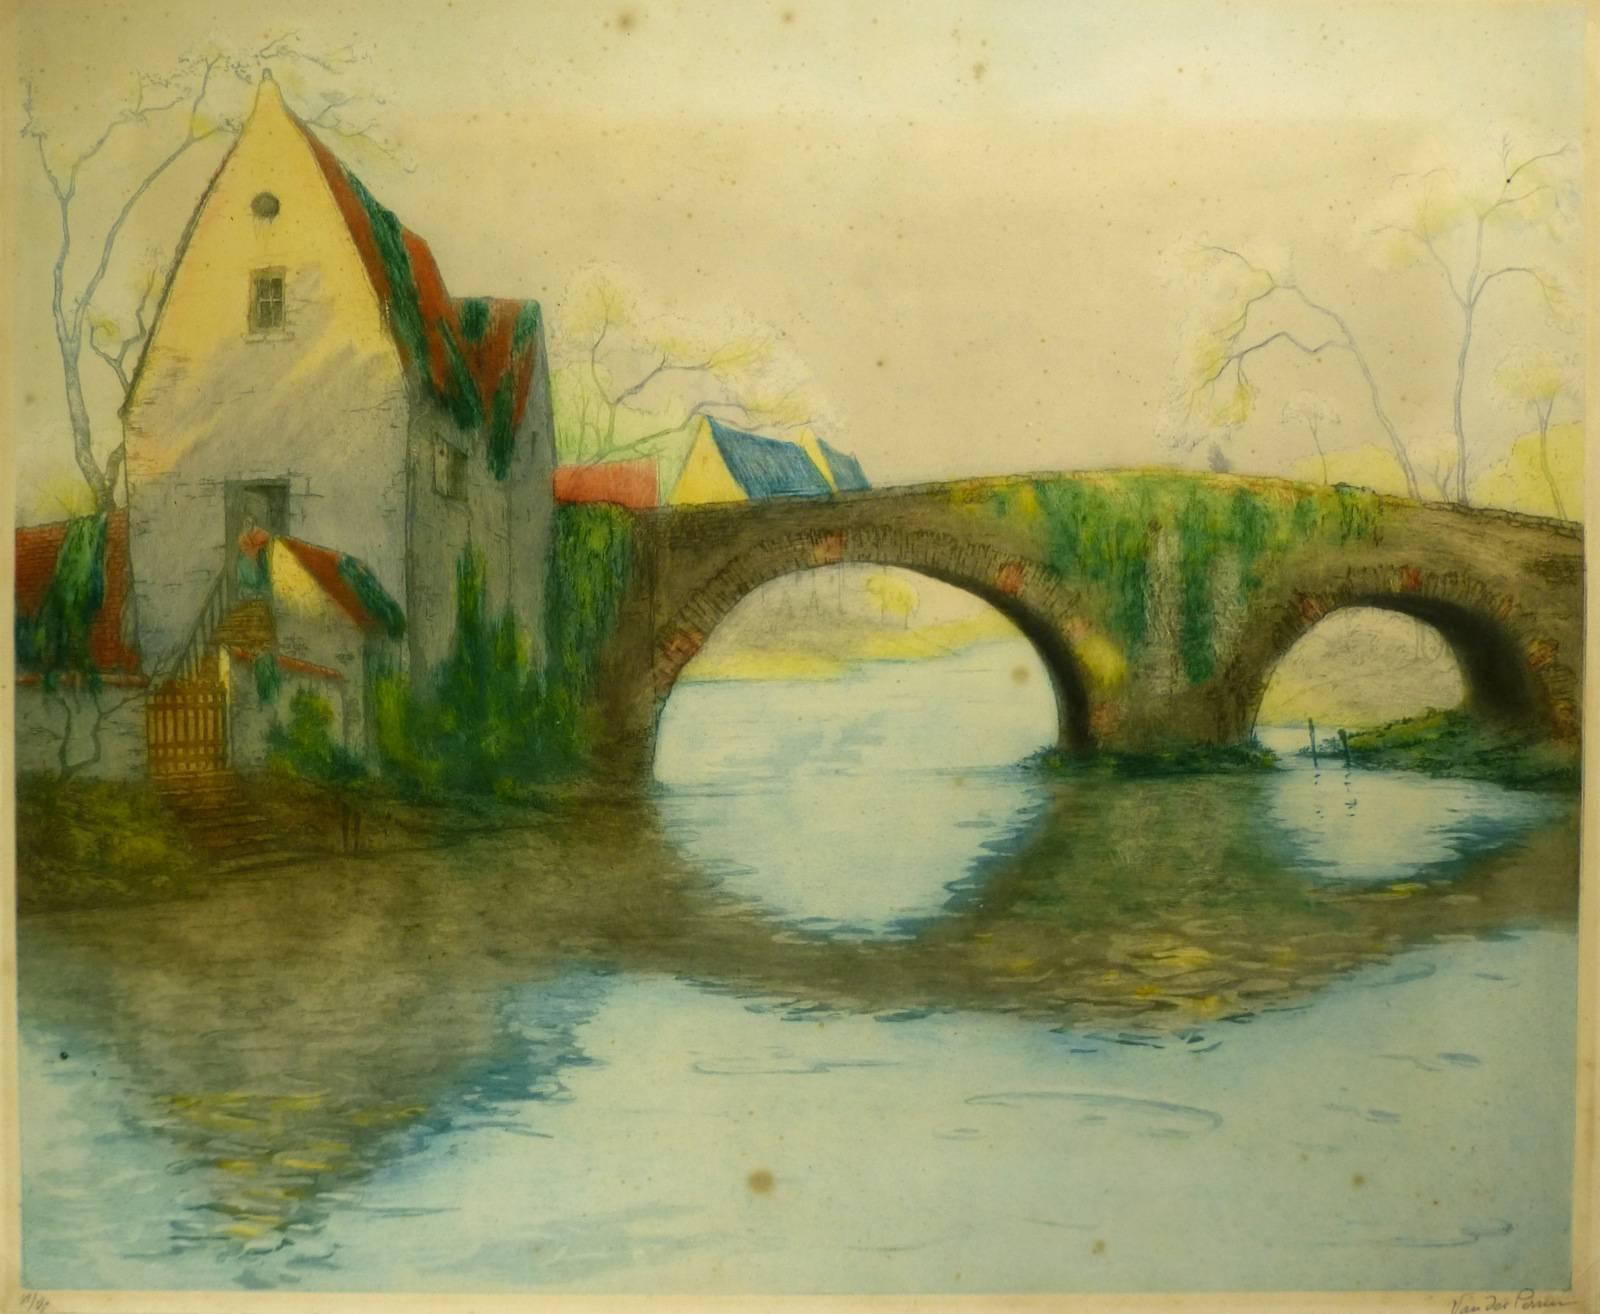 Colorful Dutch aquatint featuring old stone bridge over village river, circa 1930. Signed lower right.  Slight foxing on paper in skyline fade. 

Original artwork on paper displayed on a white mat with a gold border. Mat fits a standard-size frame. 